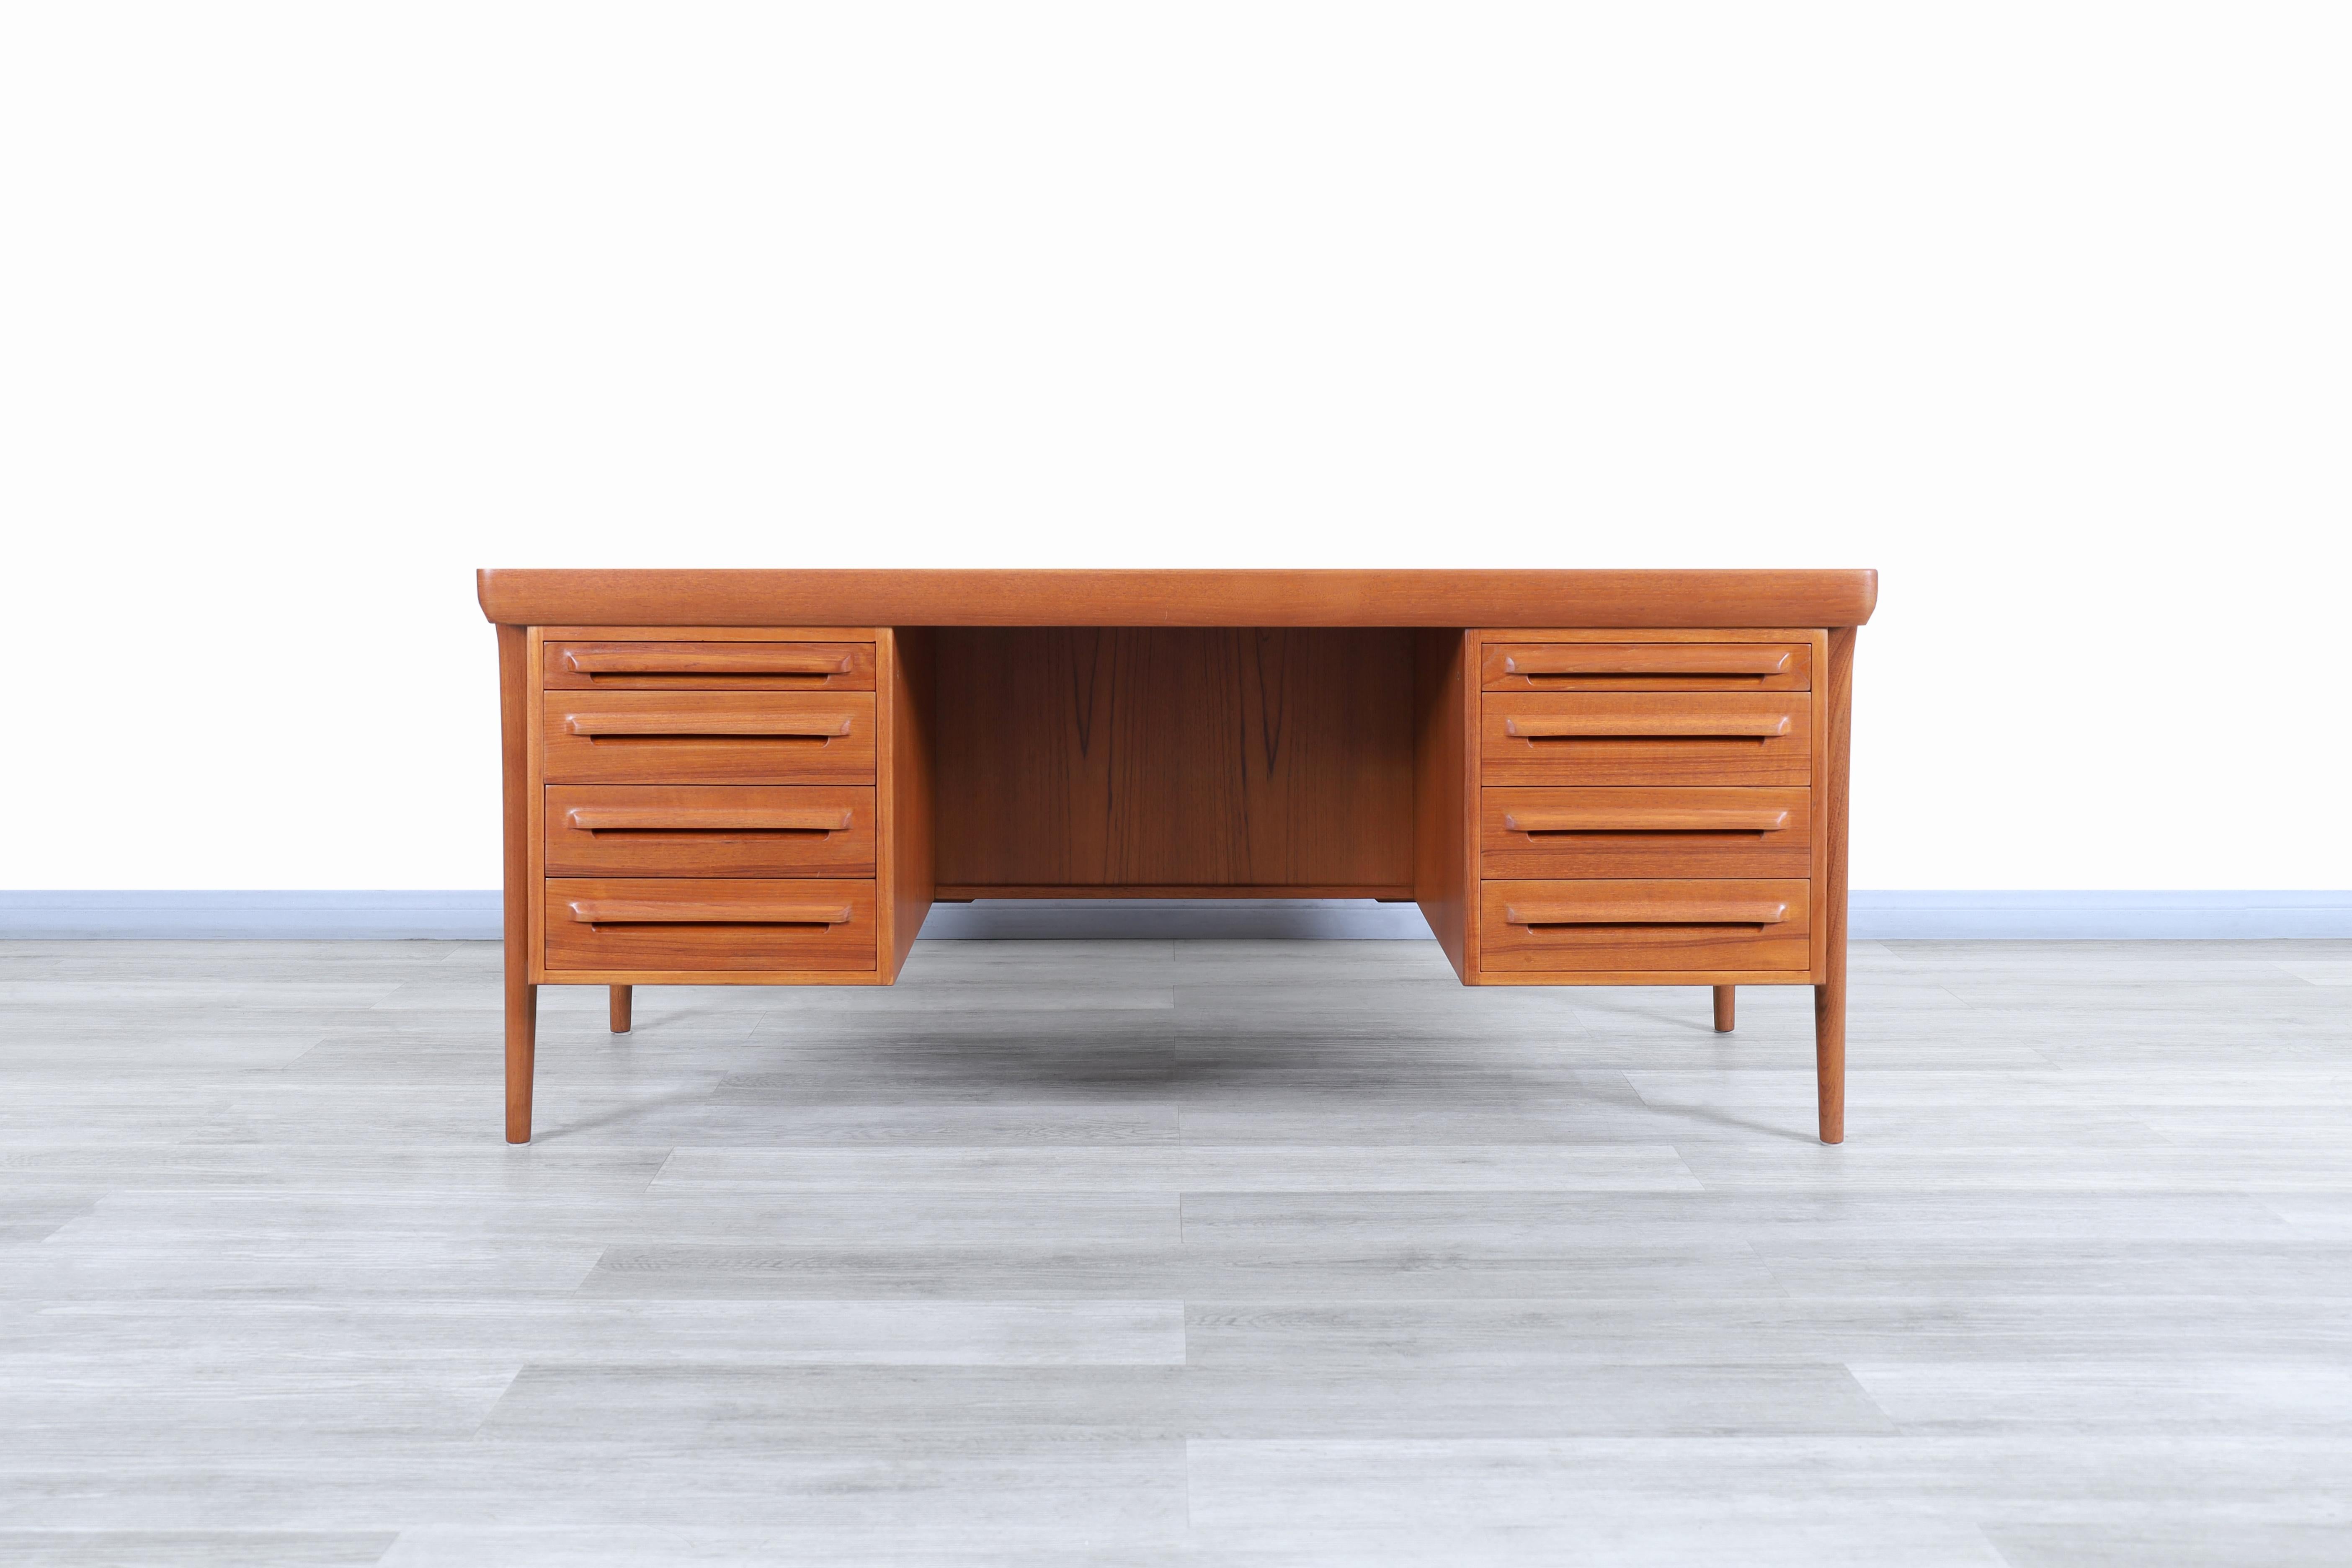 Amazing Danish teak executive desk designed by Ib Kofod Larsen for Faarup Møbelfabrik in Denmark, circa 1960s. This desk has a versatile and functional design. fine attention to detail can be seen in the construction expressed through the entire